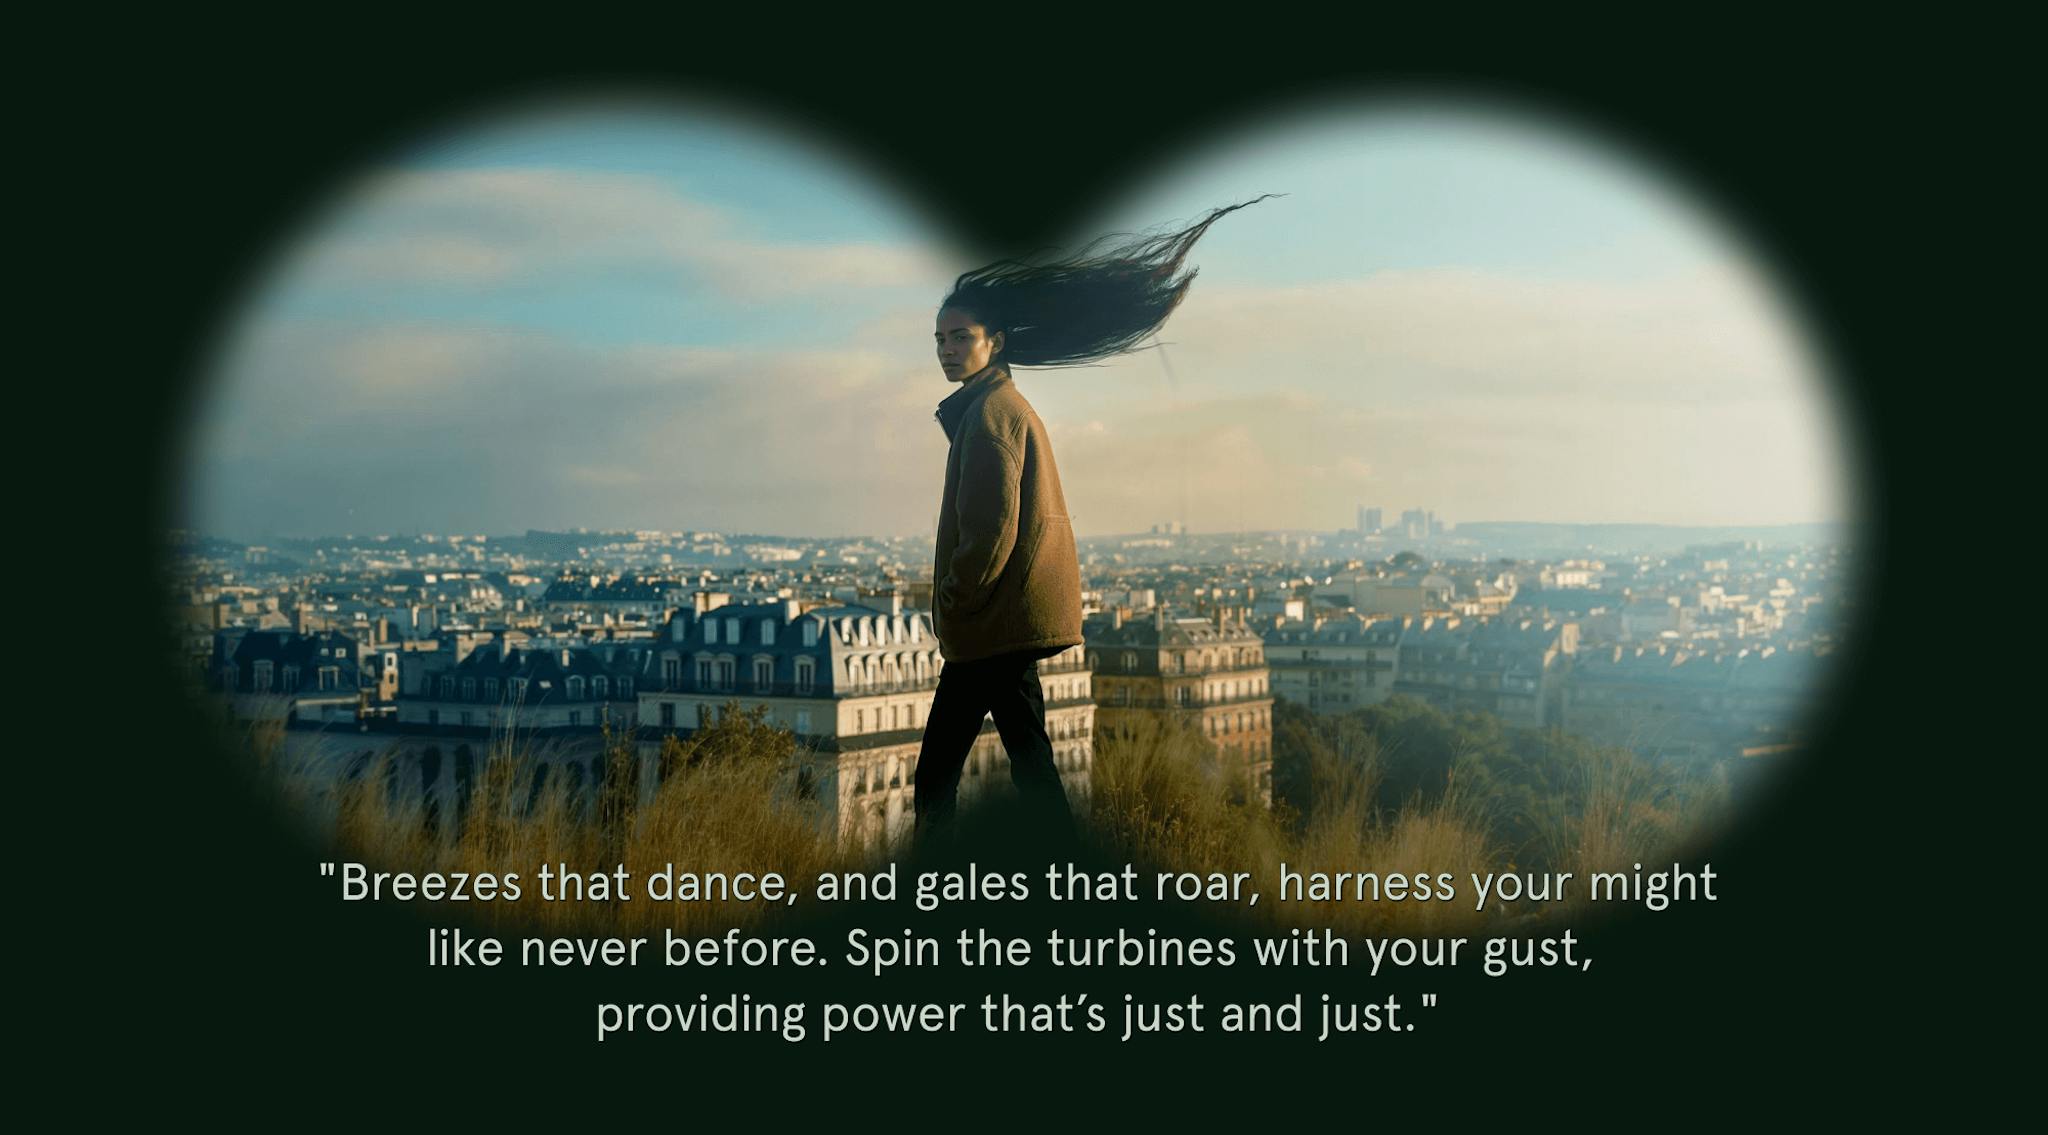 A person standing against a cityscape, their hair swept dramatically by the wind, viewed through a binocular vignette with a quote: "Breezes that dance, and gales that roar, harness your might like never before. Spin the turbines with your gust, providing power that’s just and just."
